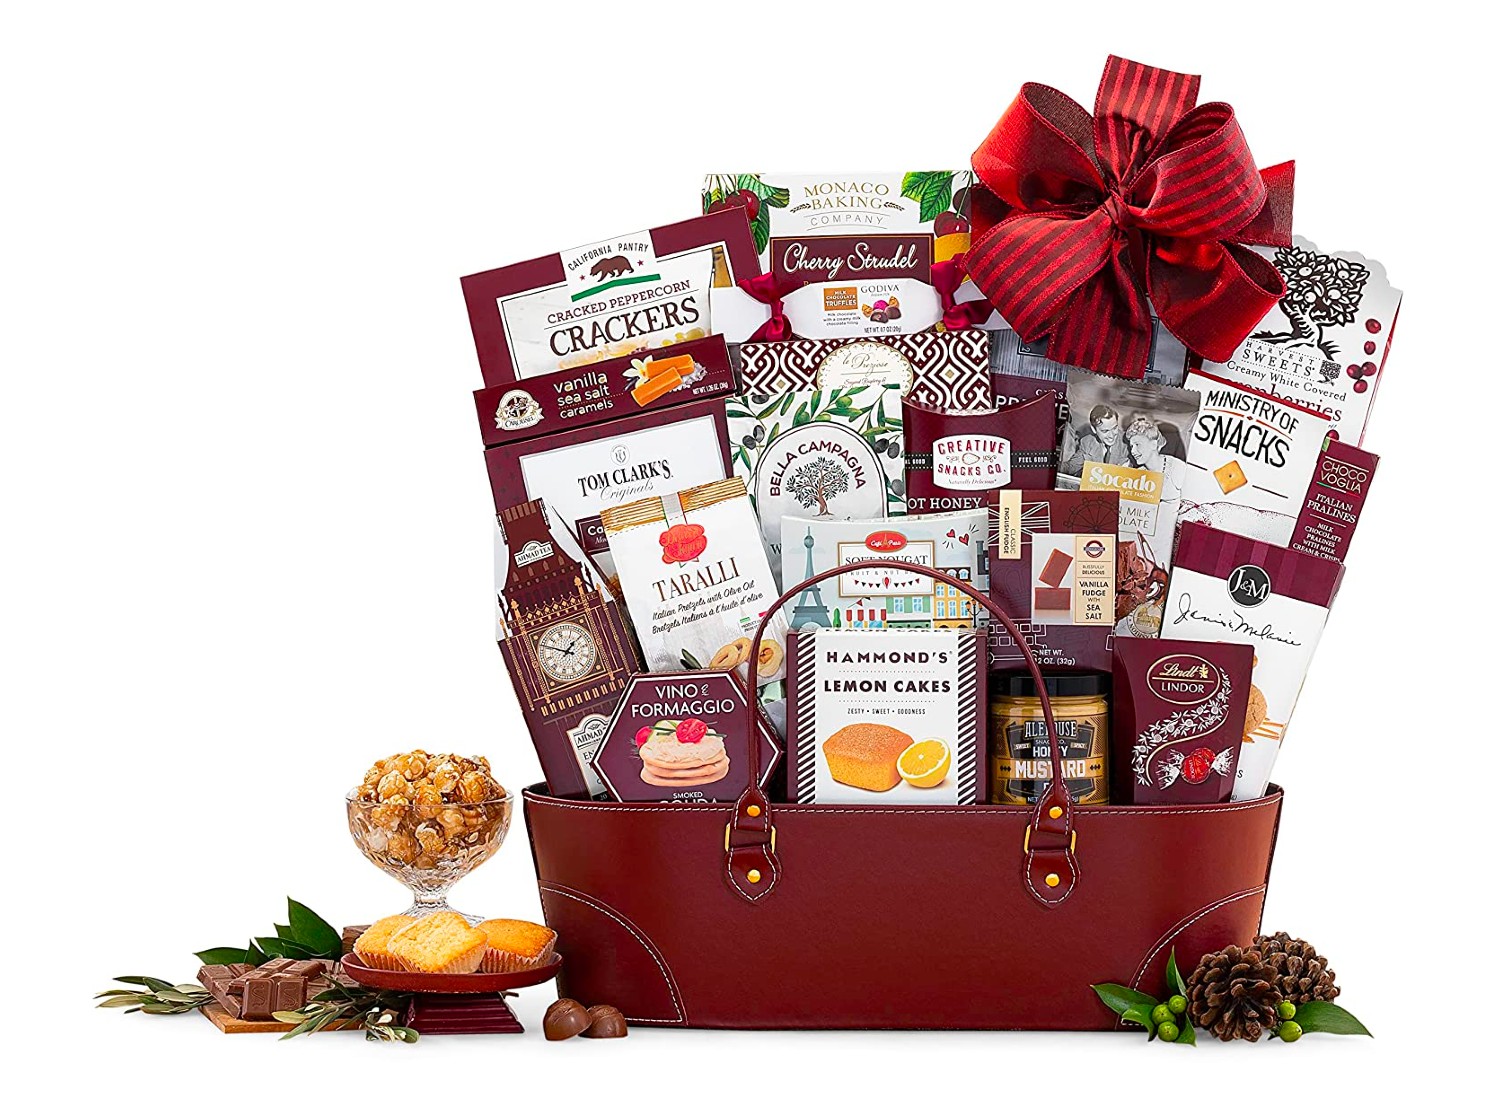  The Gourmet Choice Gift Basket by Wine Country Gift